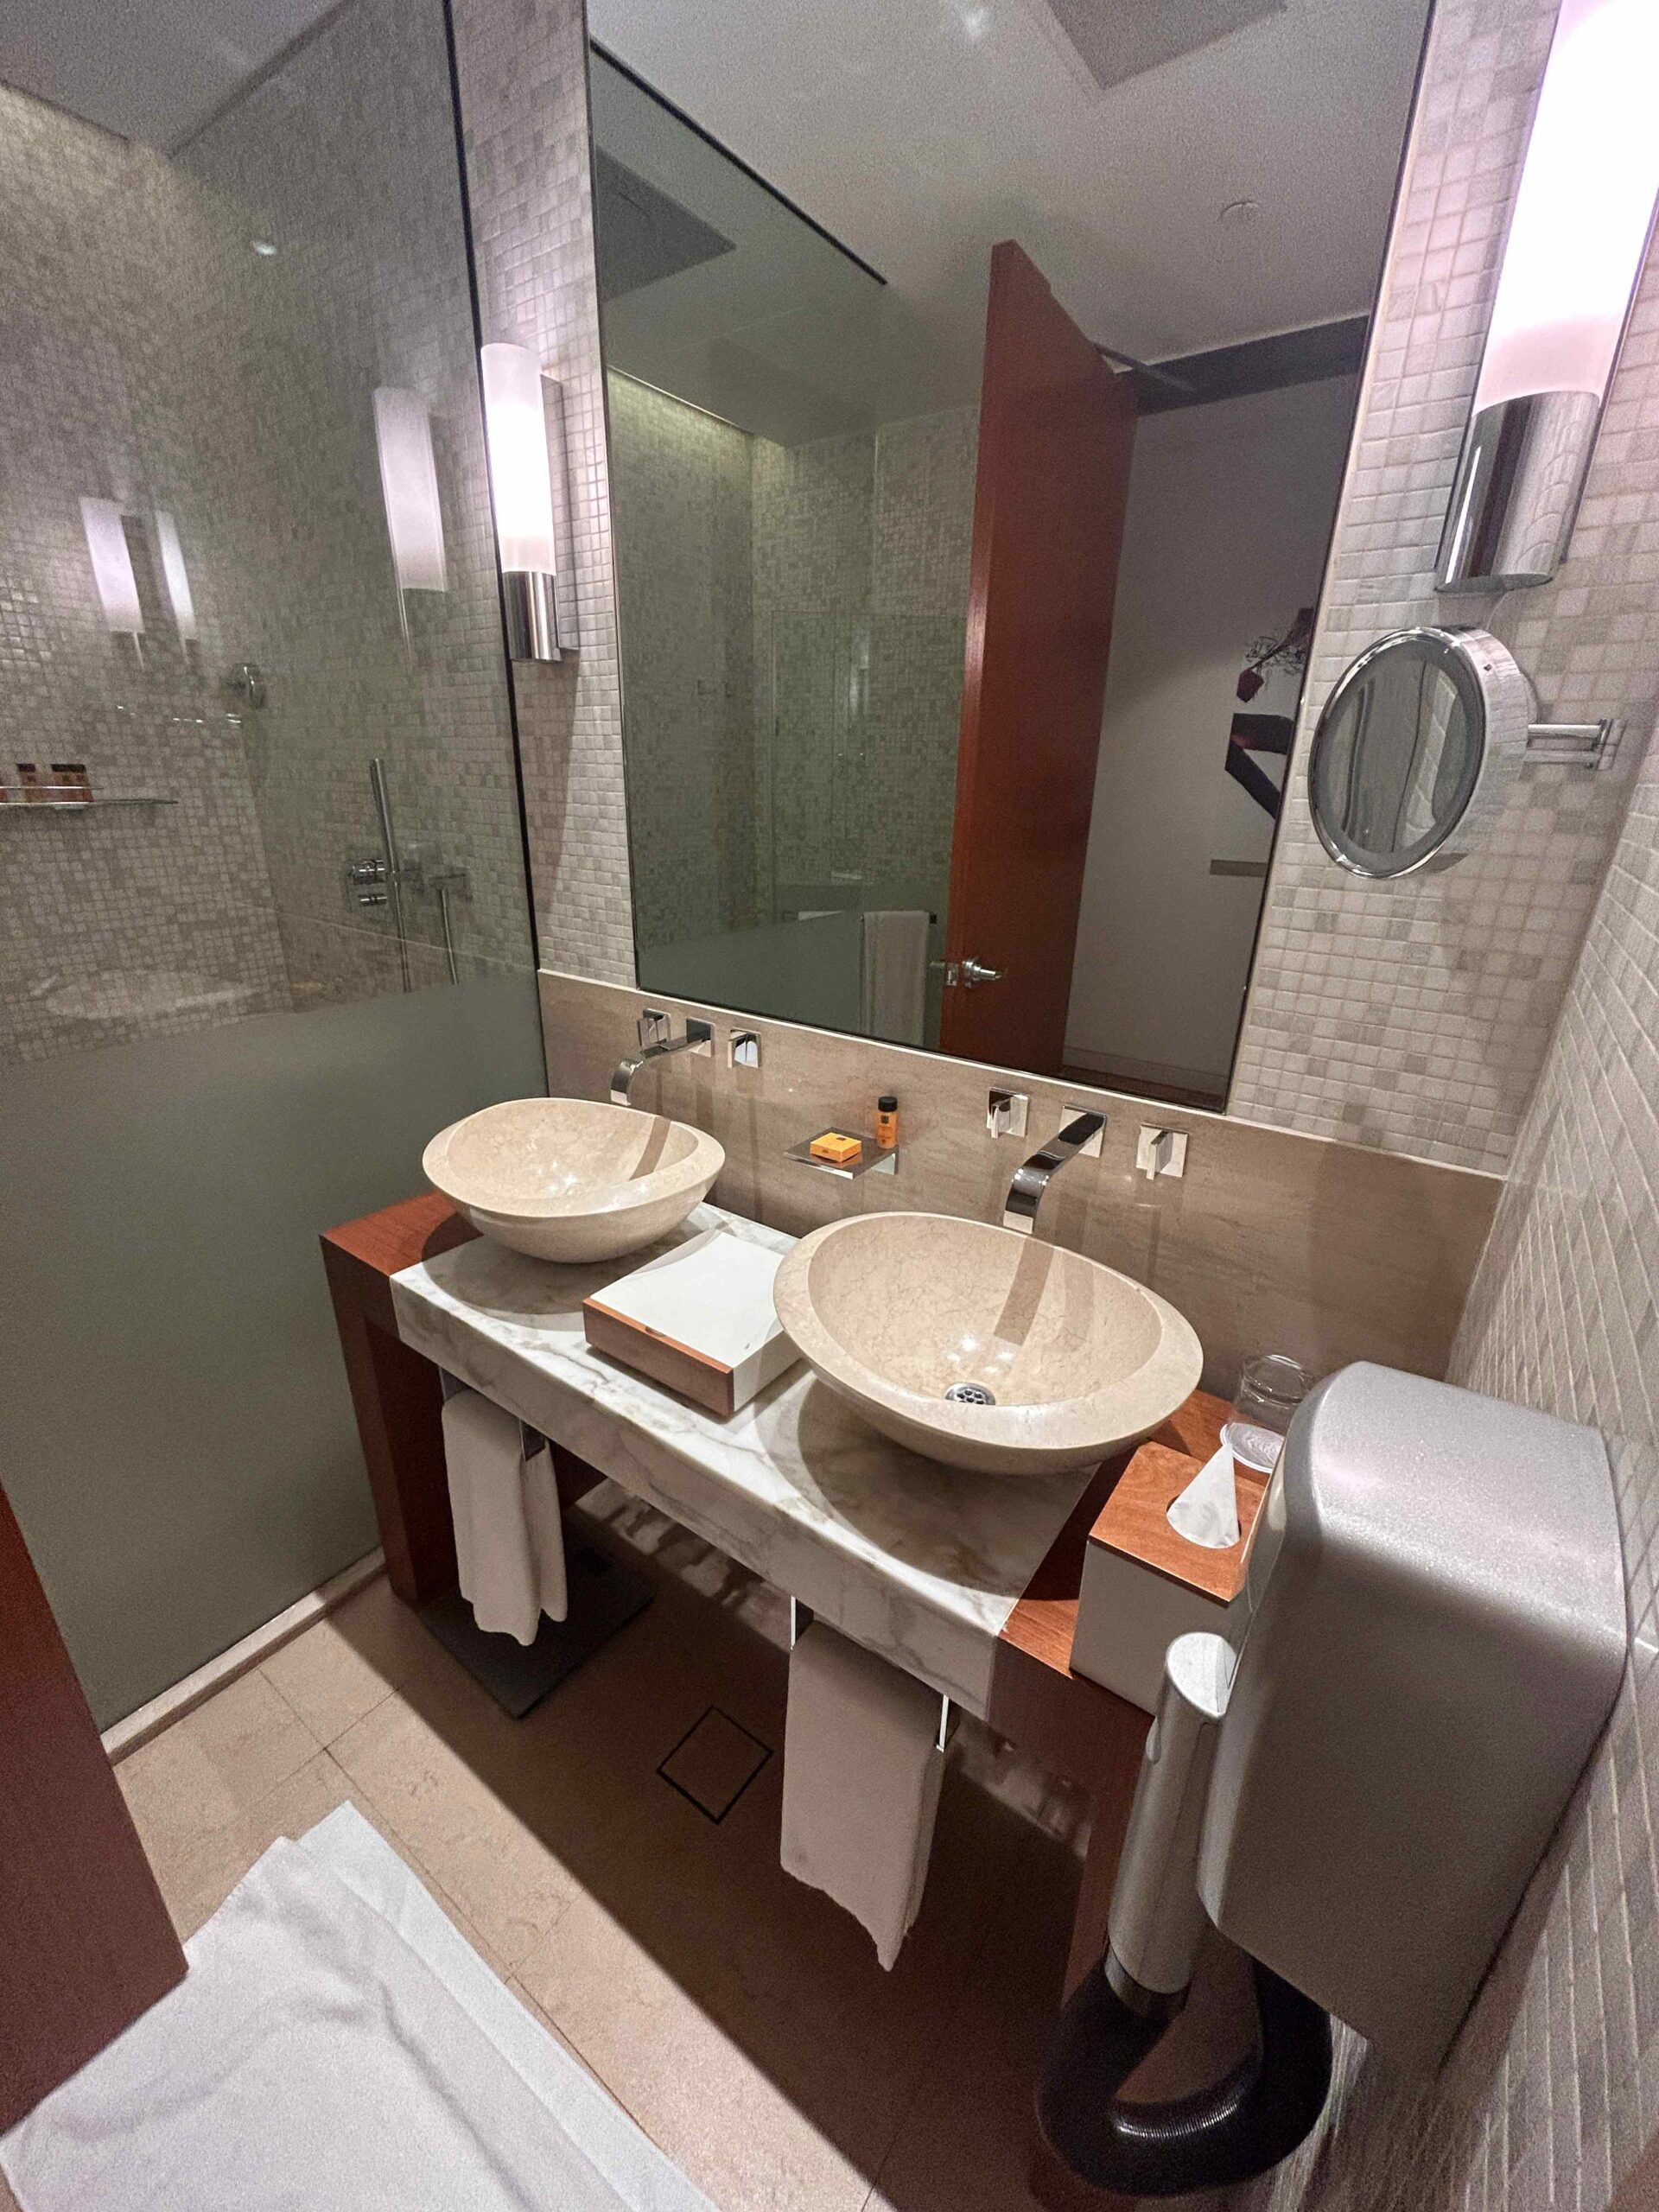 A view of Doha transit hotel Bathroom Sink